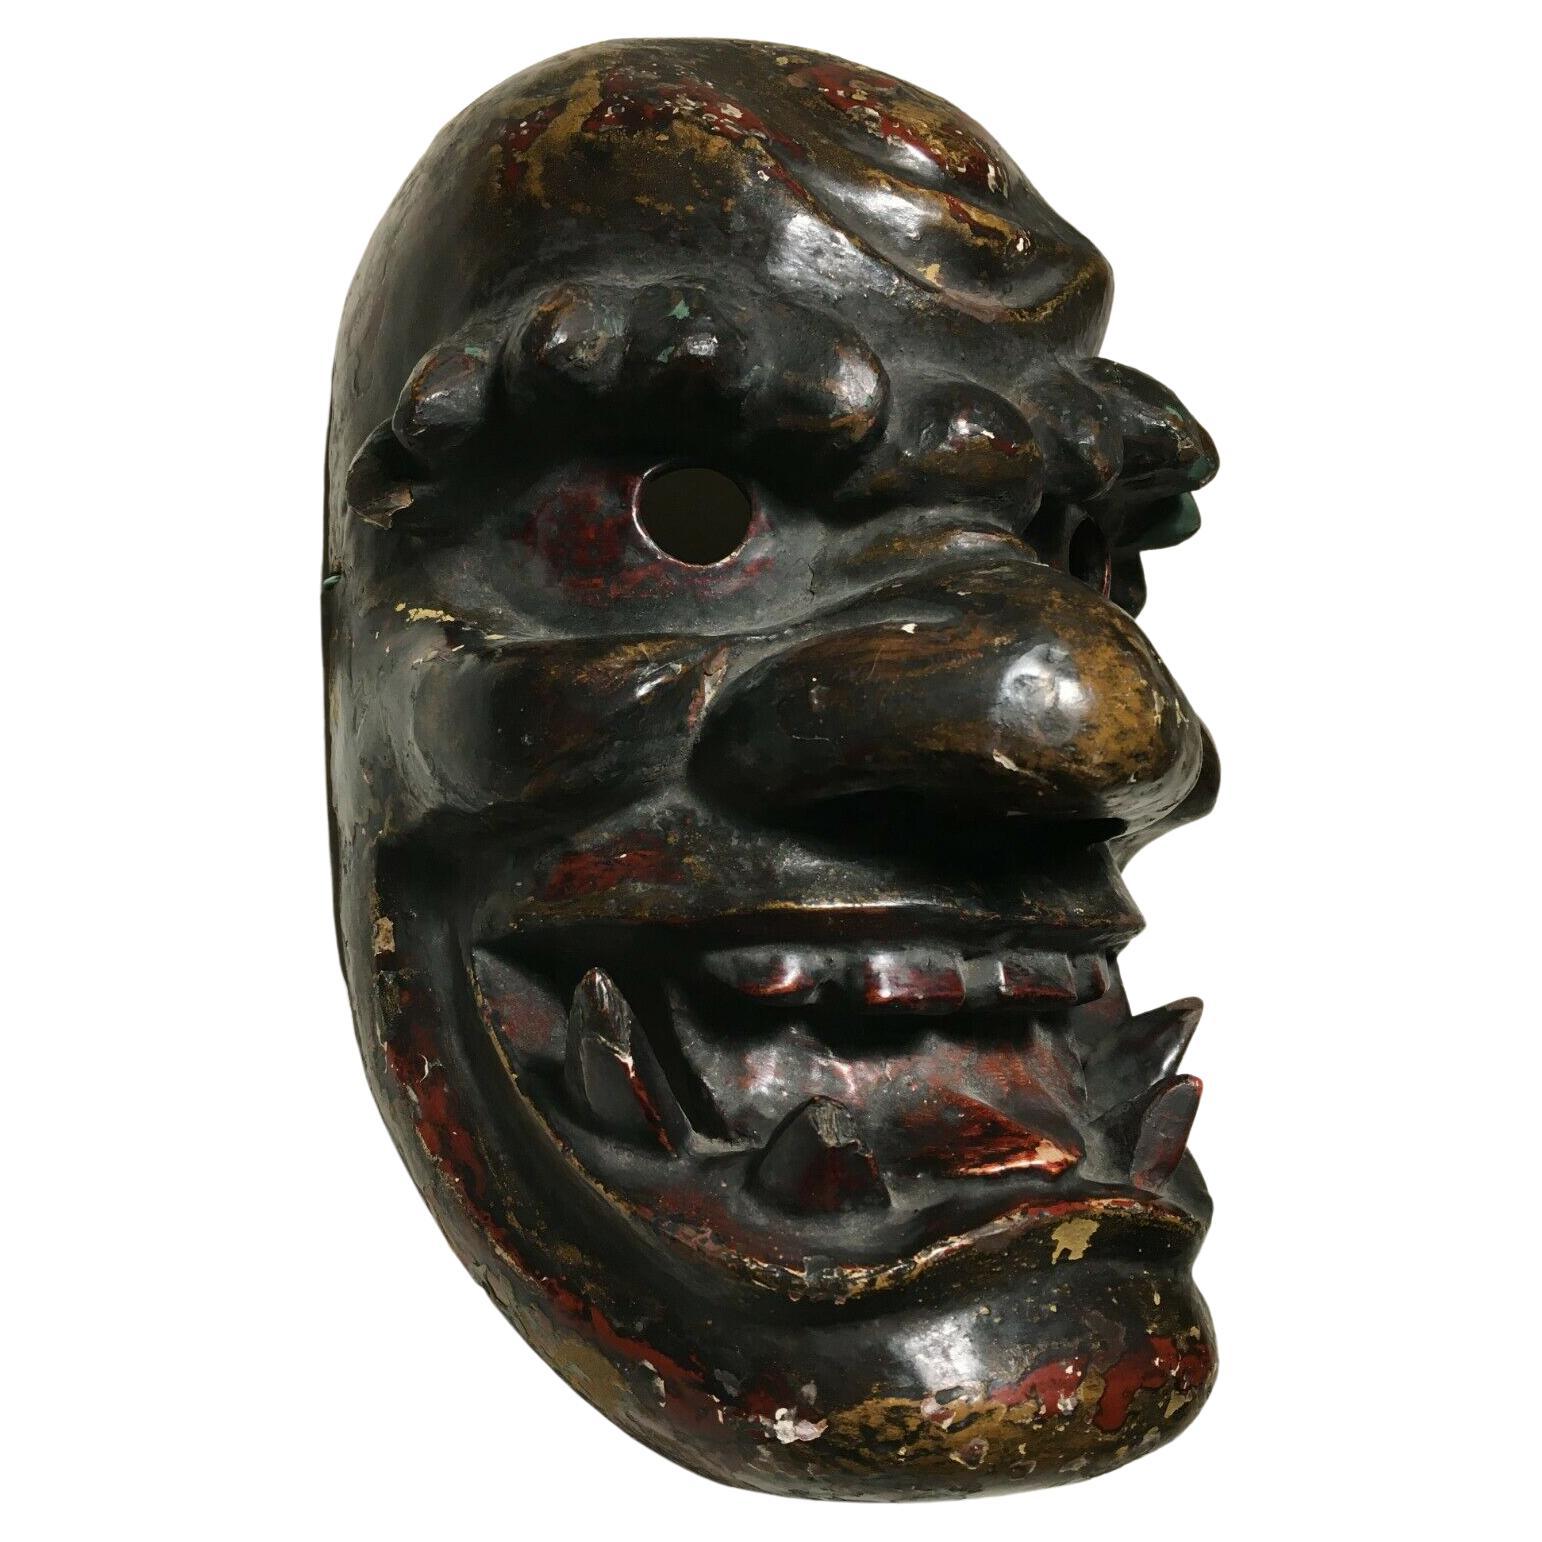 Museum quality Japanese ethnographic danced mask
Interior of the mask has rick, thick, patina attesting that its been danced many times
There are multiple layers paint (I count at least 4 under the chin) - which further confirms the ethnographic